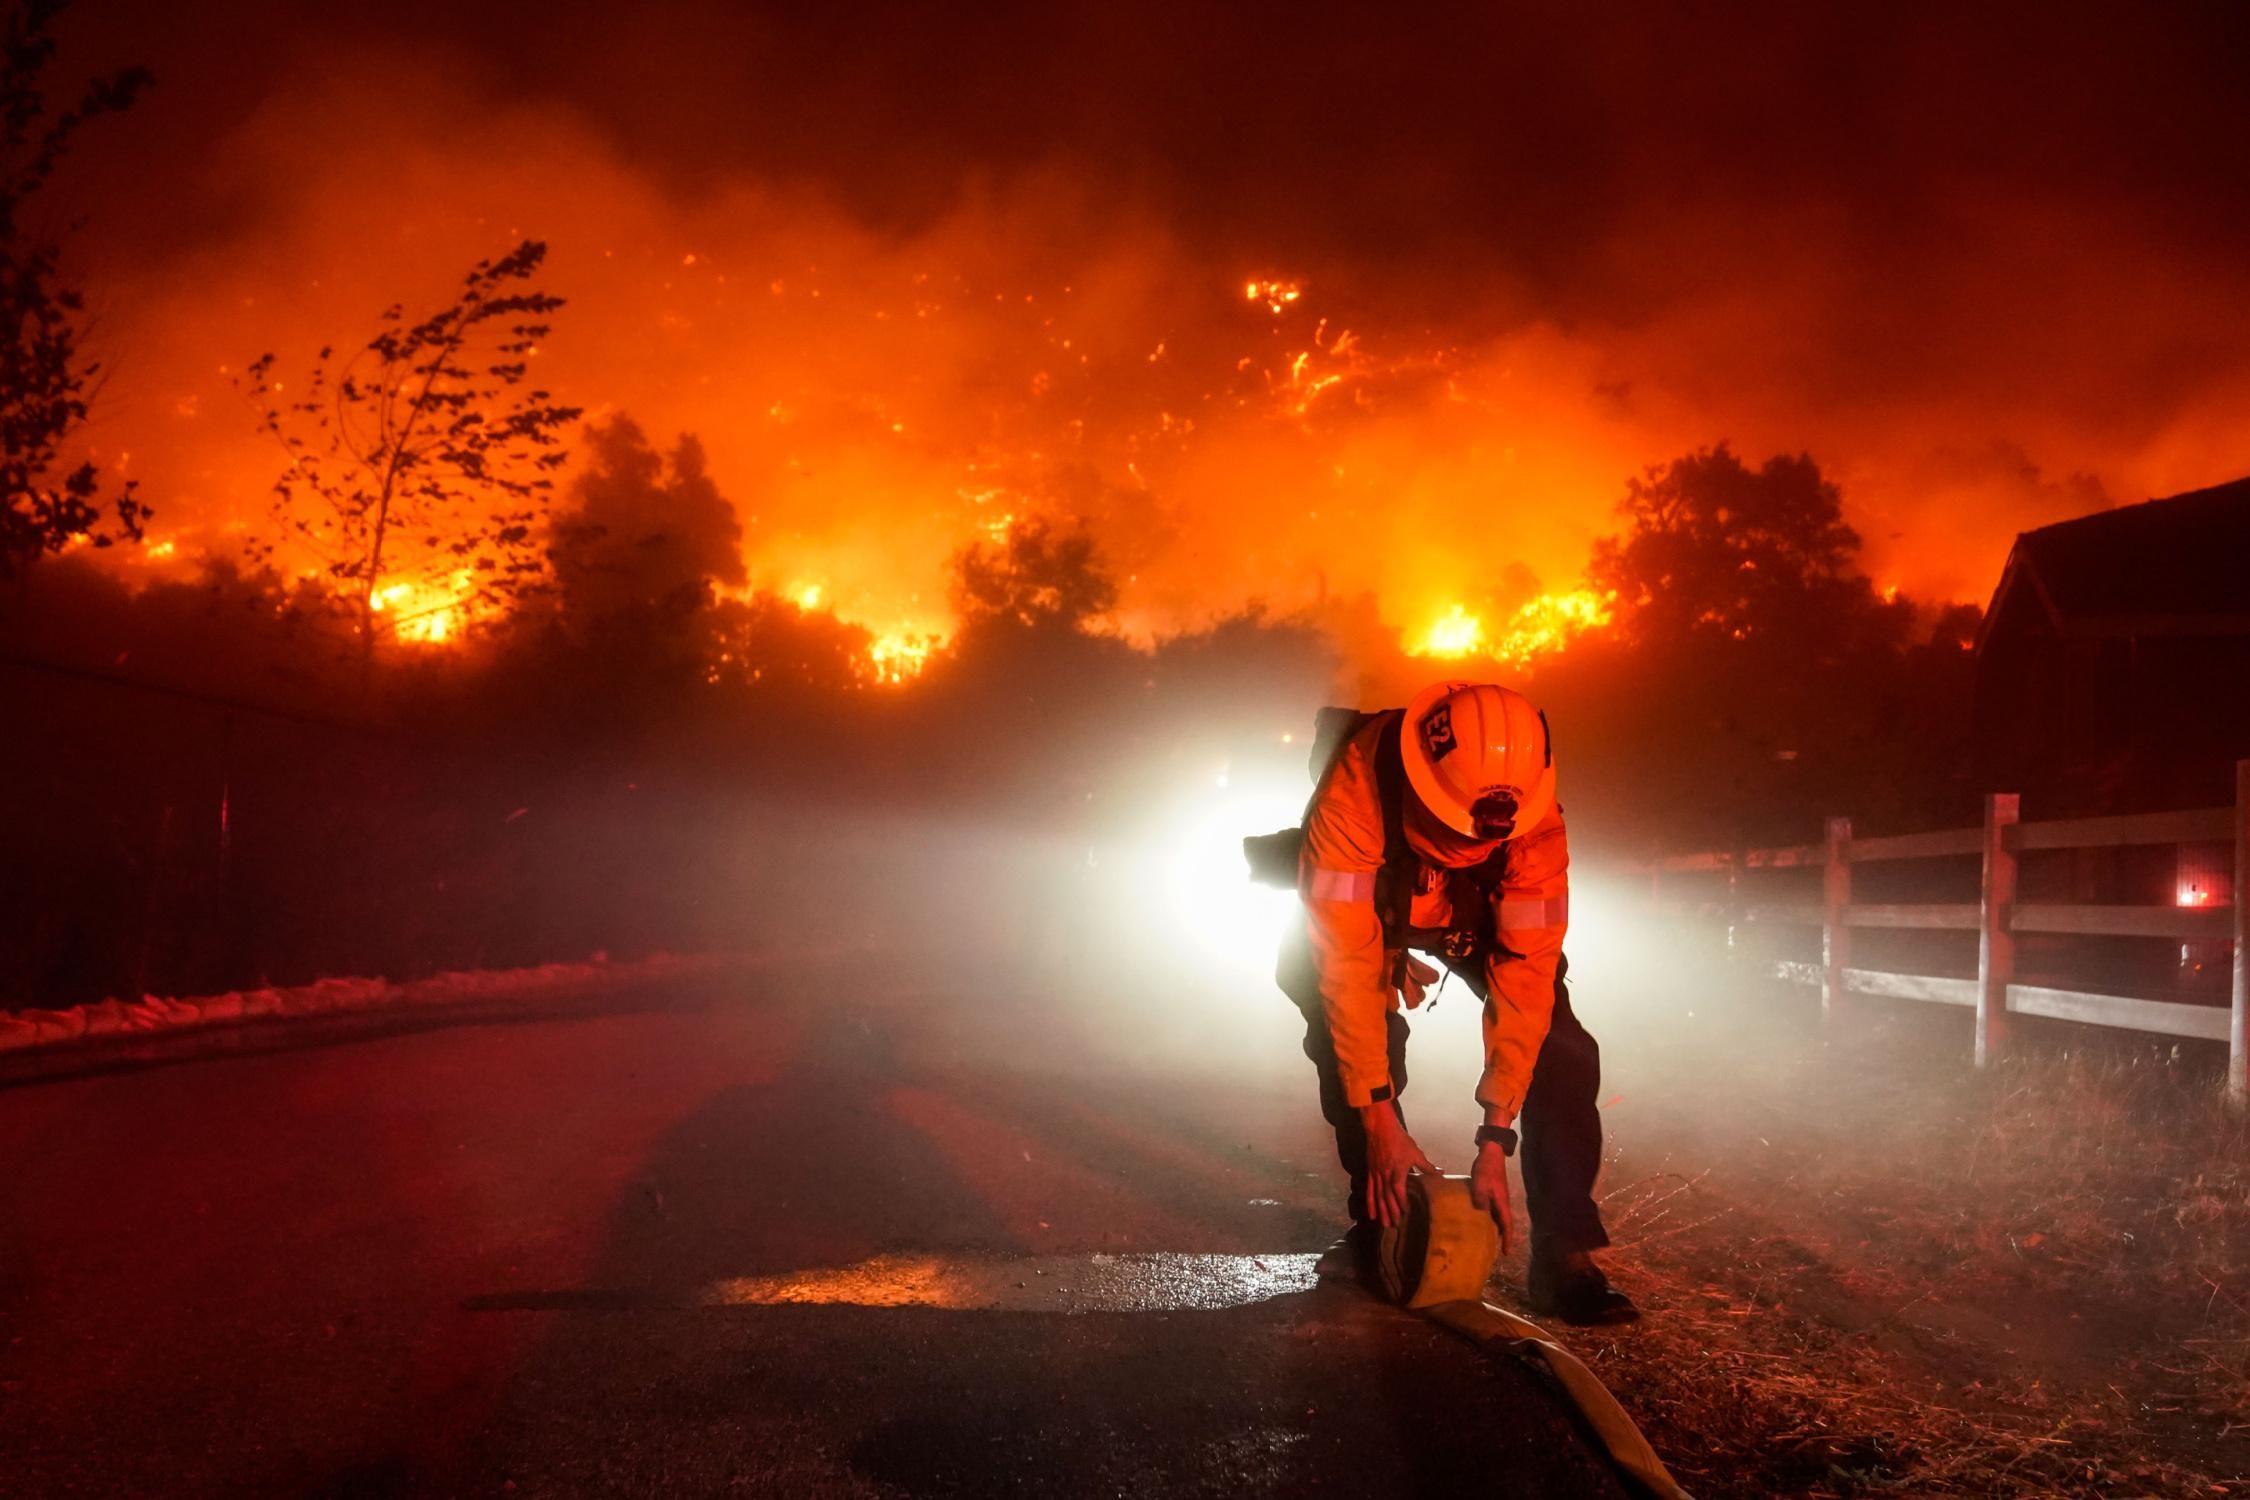 Firefighters battle the Bond Fire, started by a structure fire that extended into nearby vegetation, along Silverado Canyon Road on Thursday, December 3, 2020 in Silverado, California.